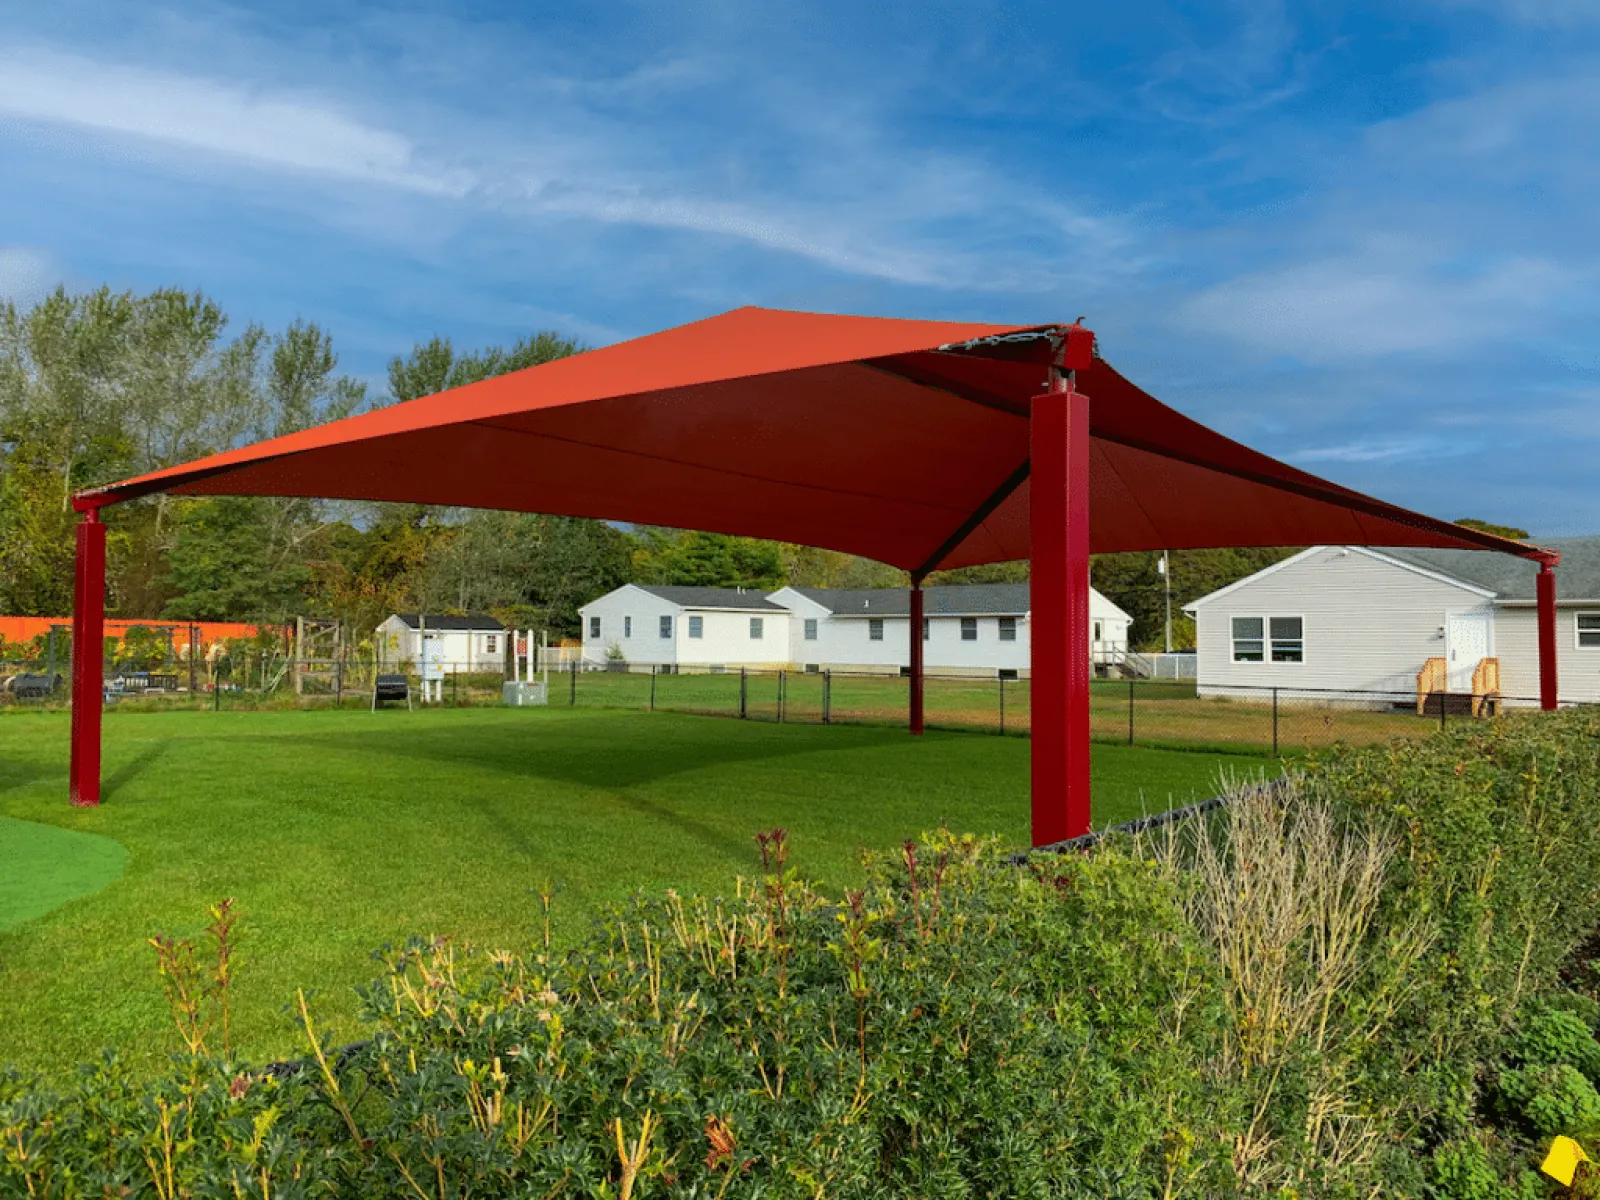 a red structure in a grassy field